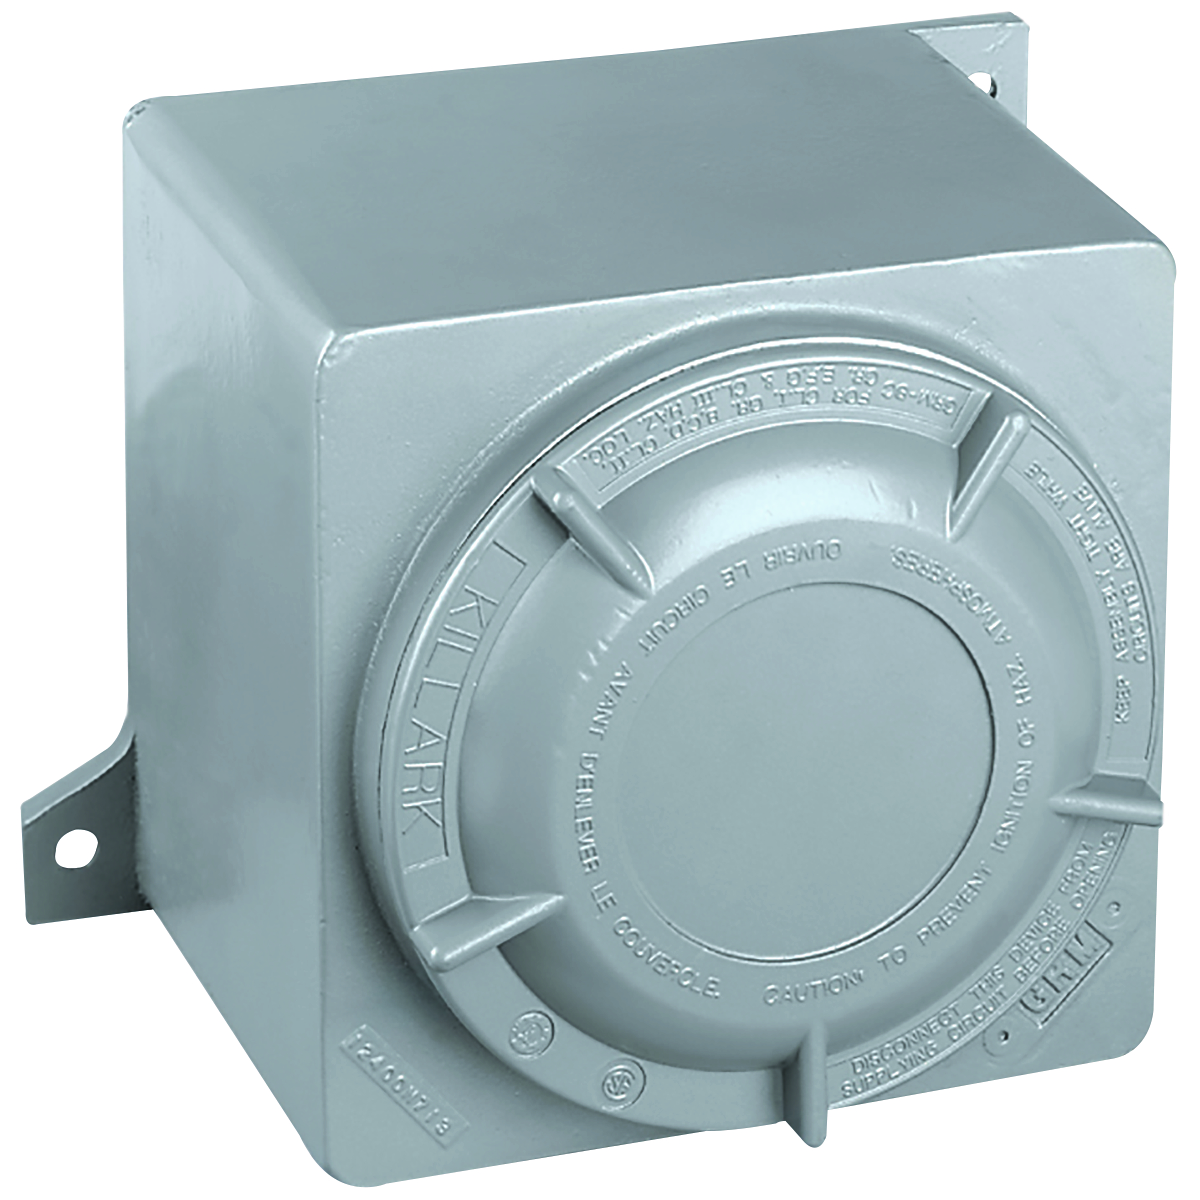 GR SERIES - THREADED BOX WITH BLANK COVER - COVER OPENING DIAMETER4-11/32 IN - VIEWING AREA 3 IN - MAXIMUM CONDUIT SIZE 2 IN